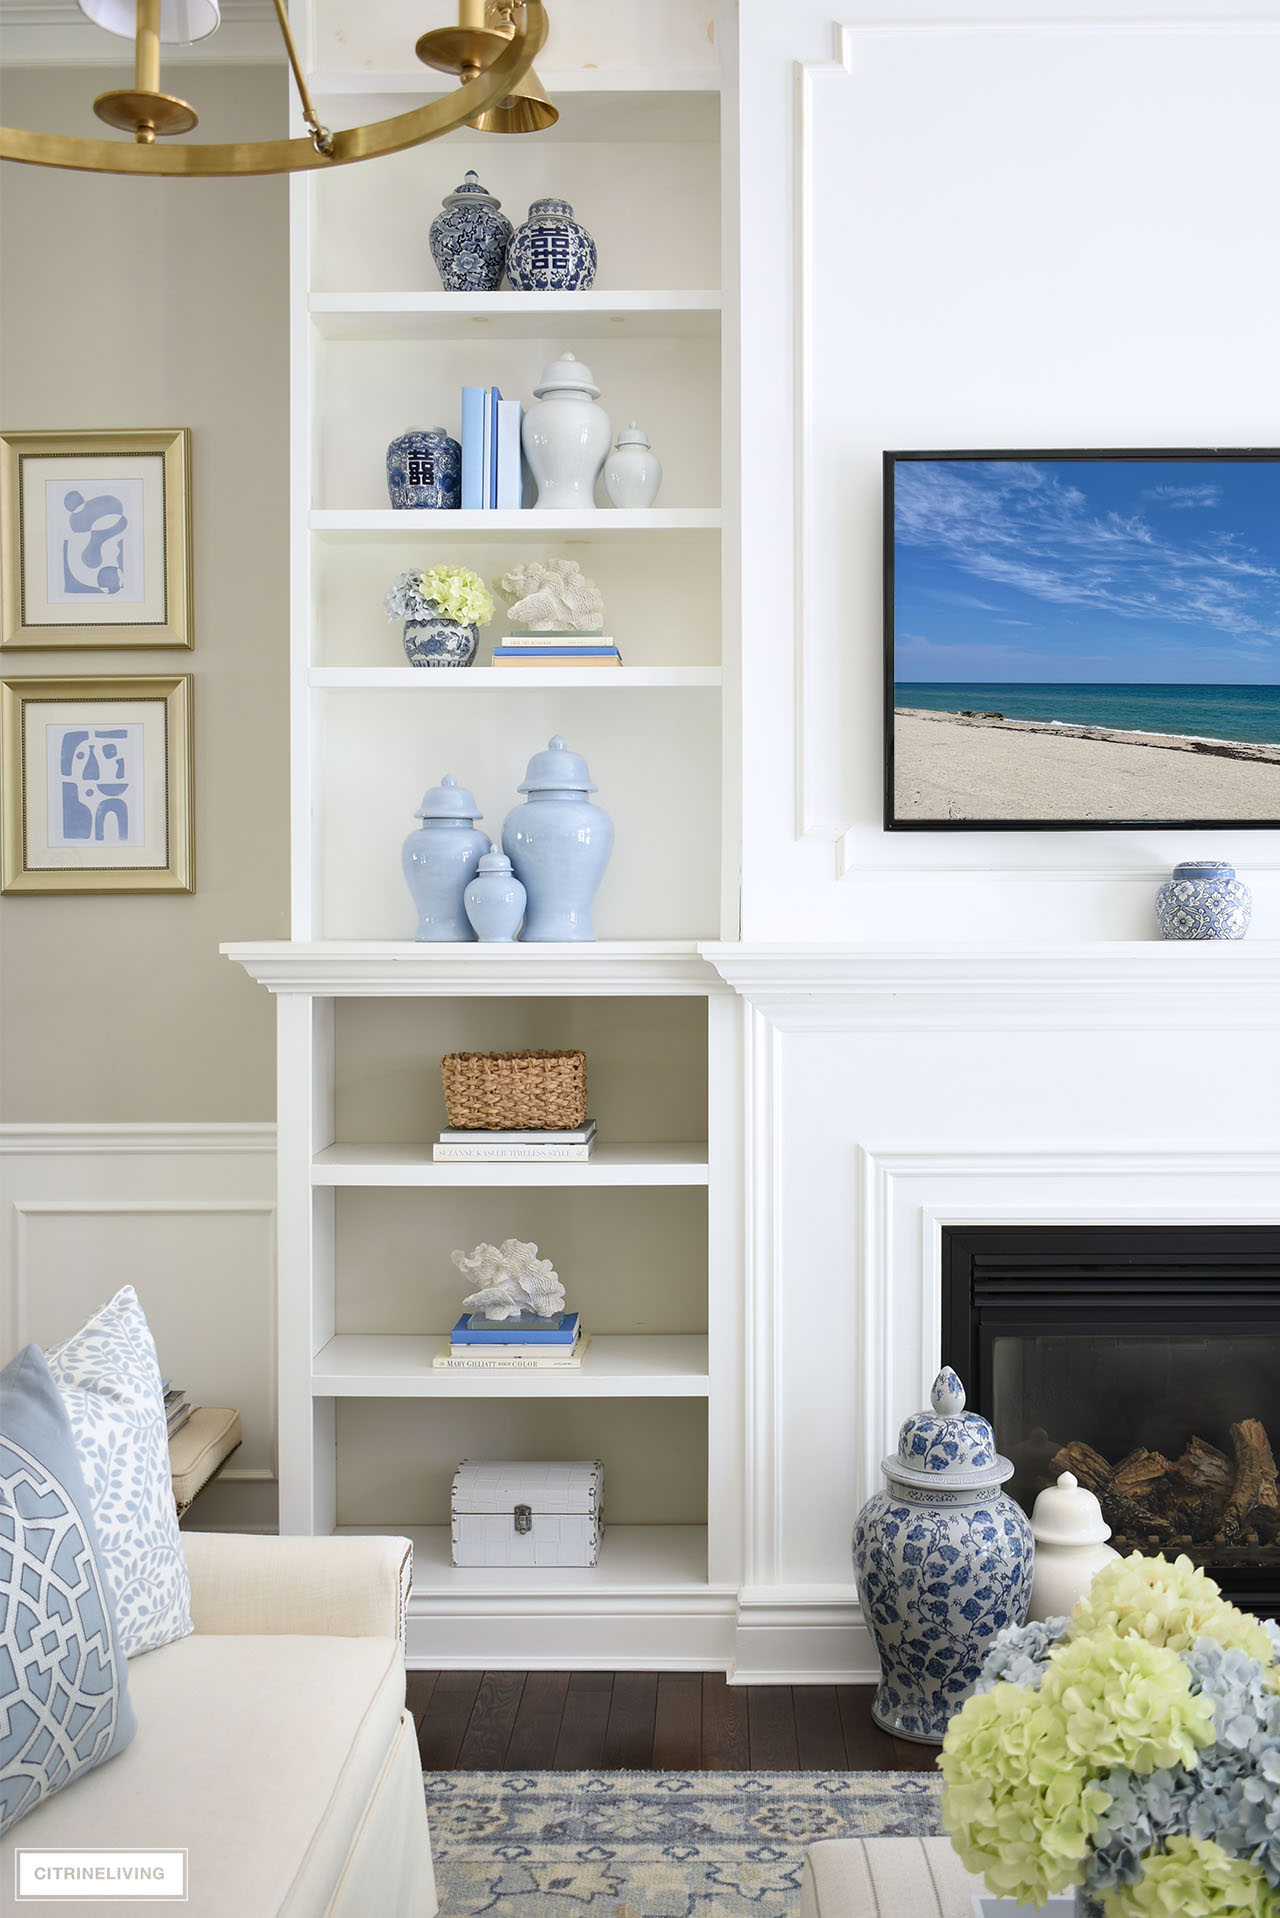 Bookshelves styled for summer with ginger jars, baskets, books, coastal accents and faux hydrangeas.